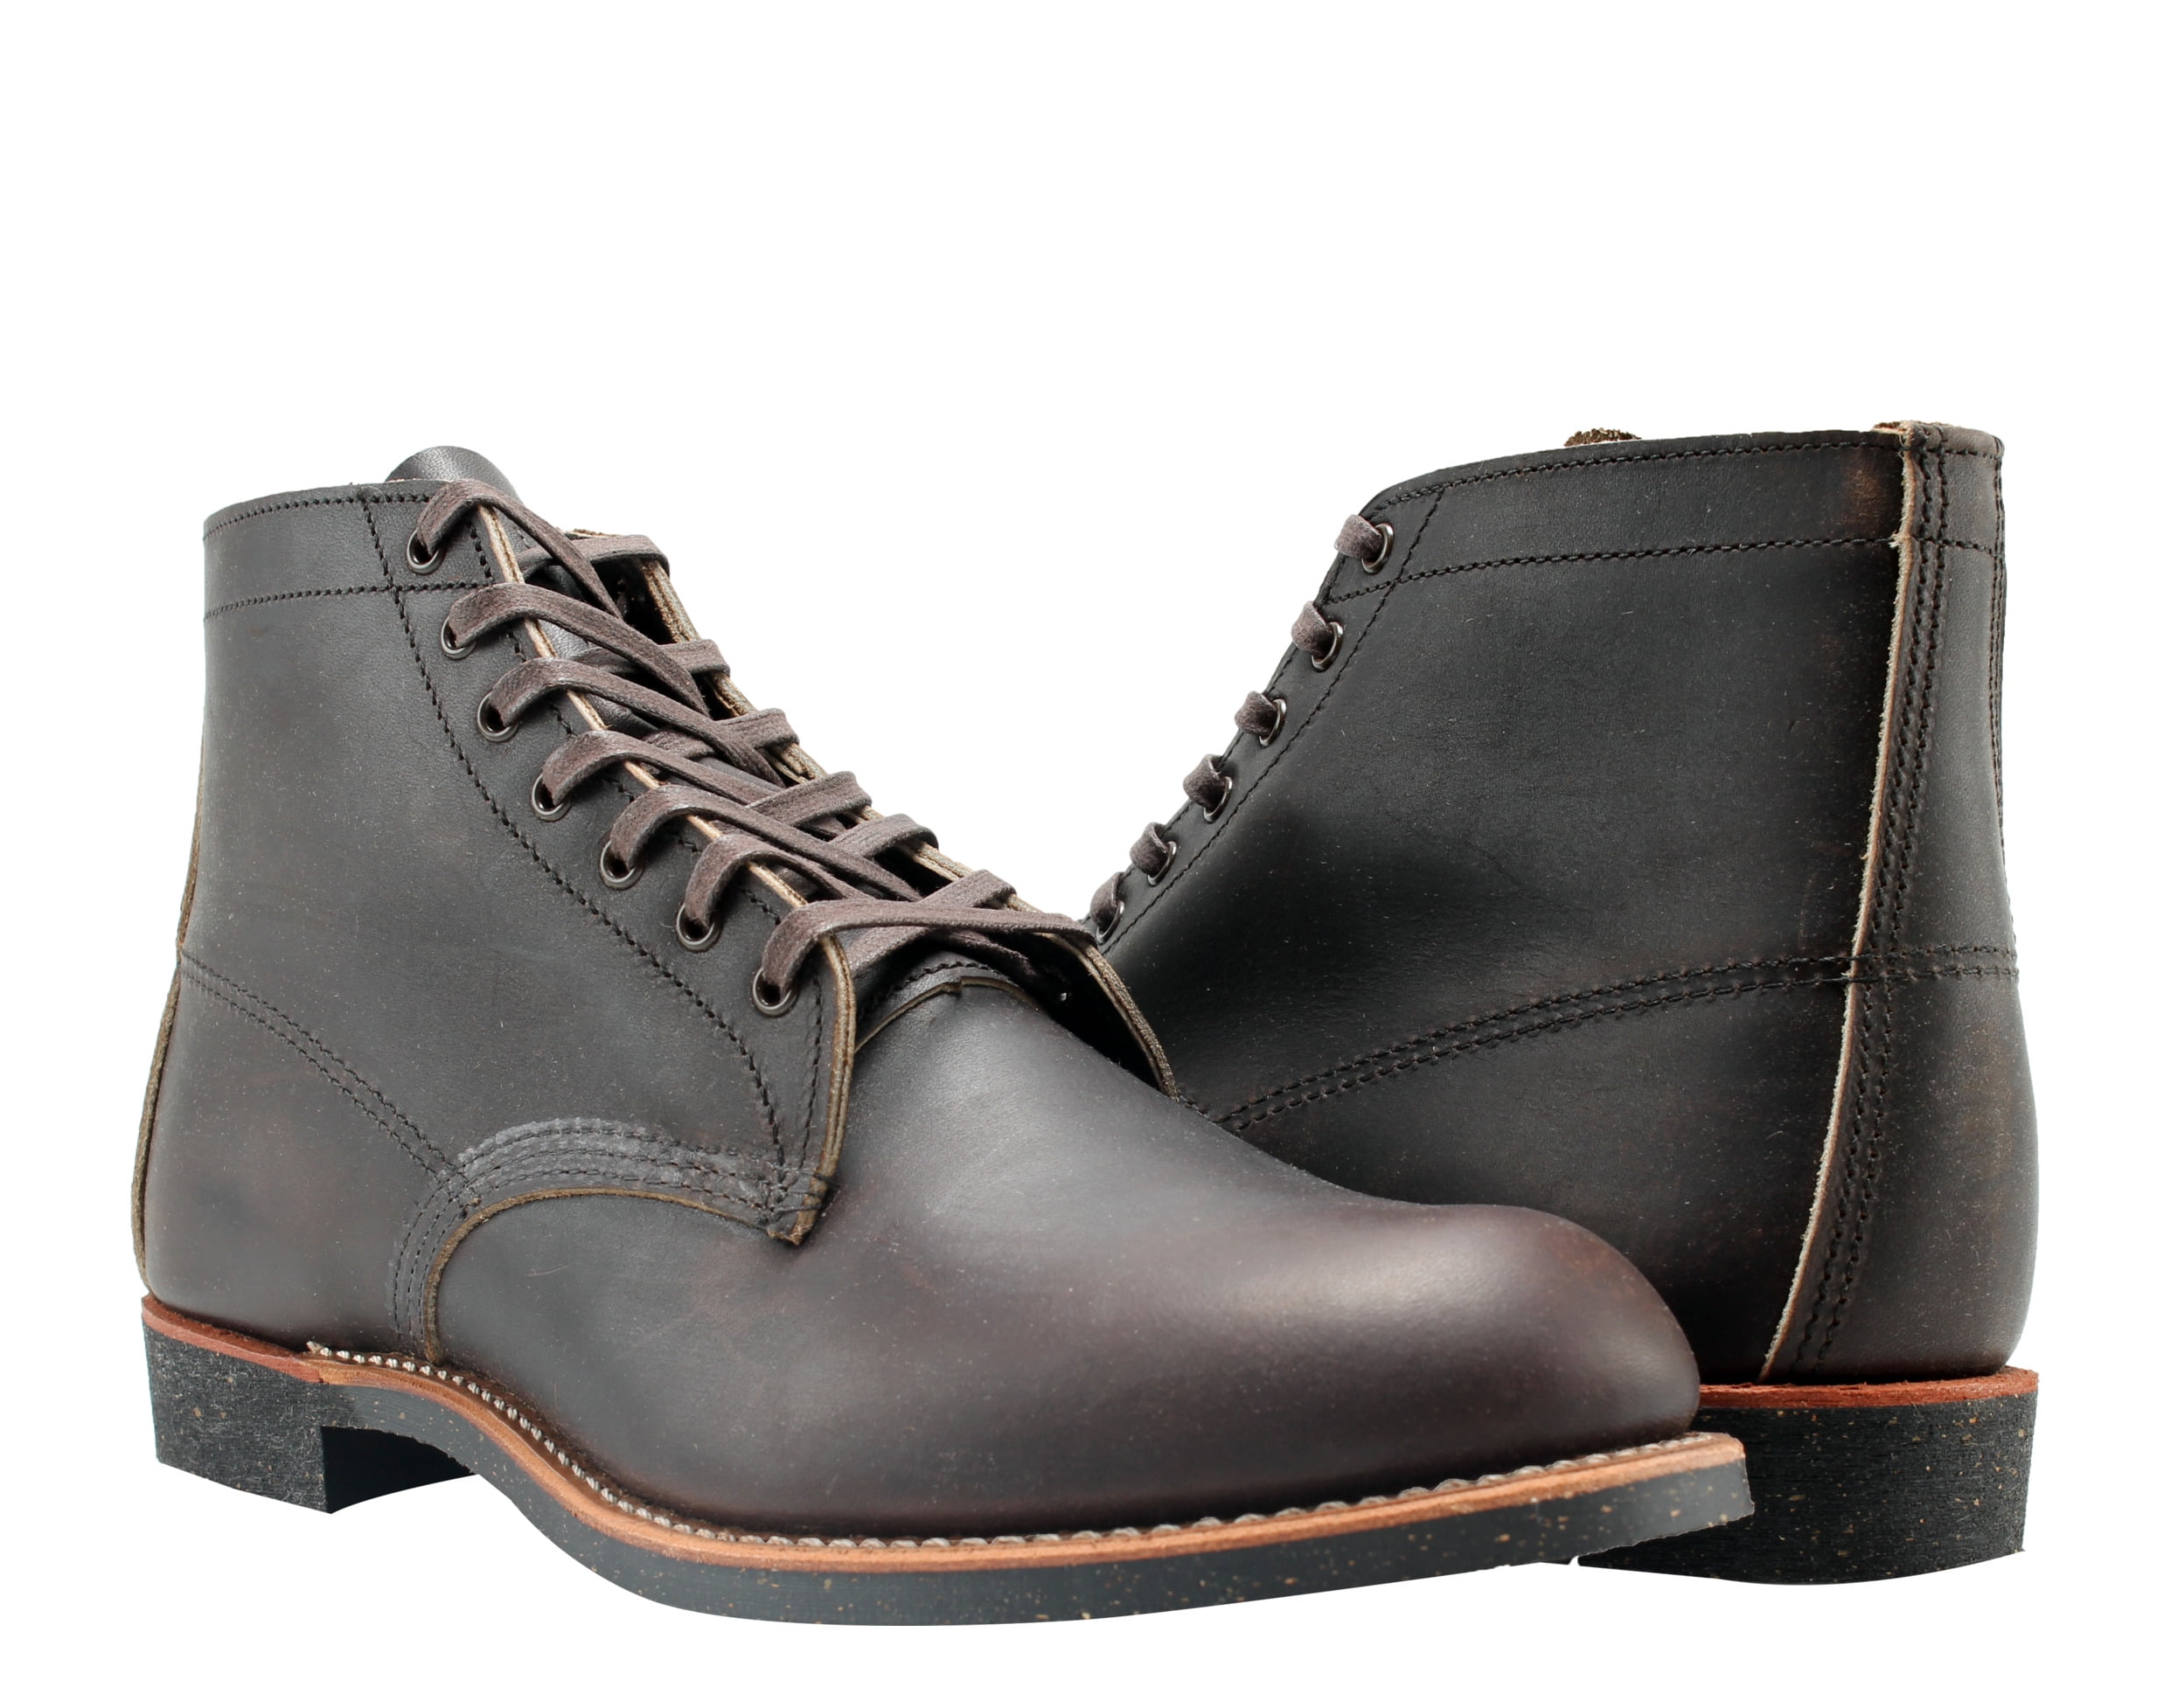 red wing 8061